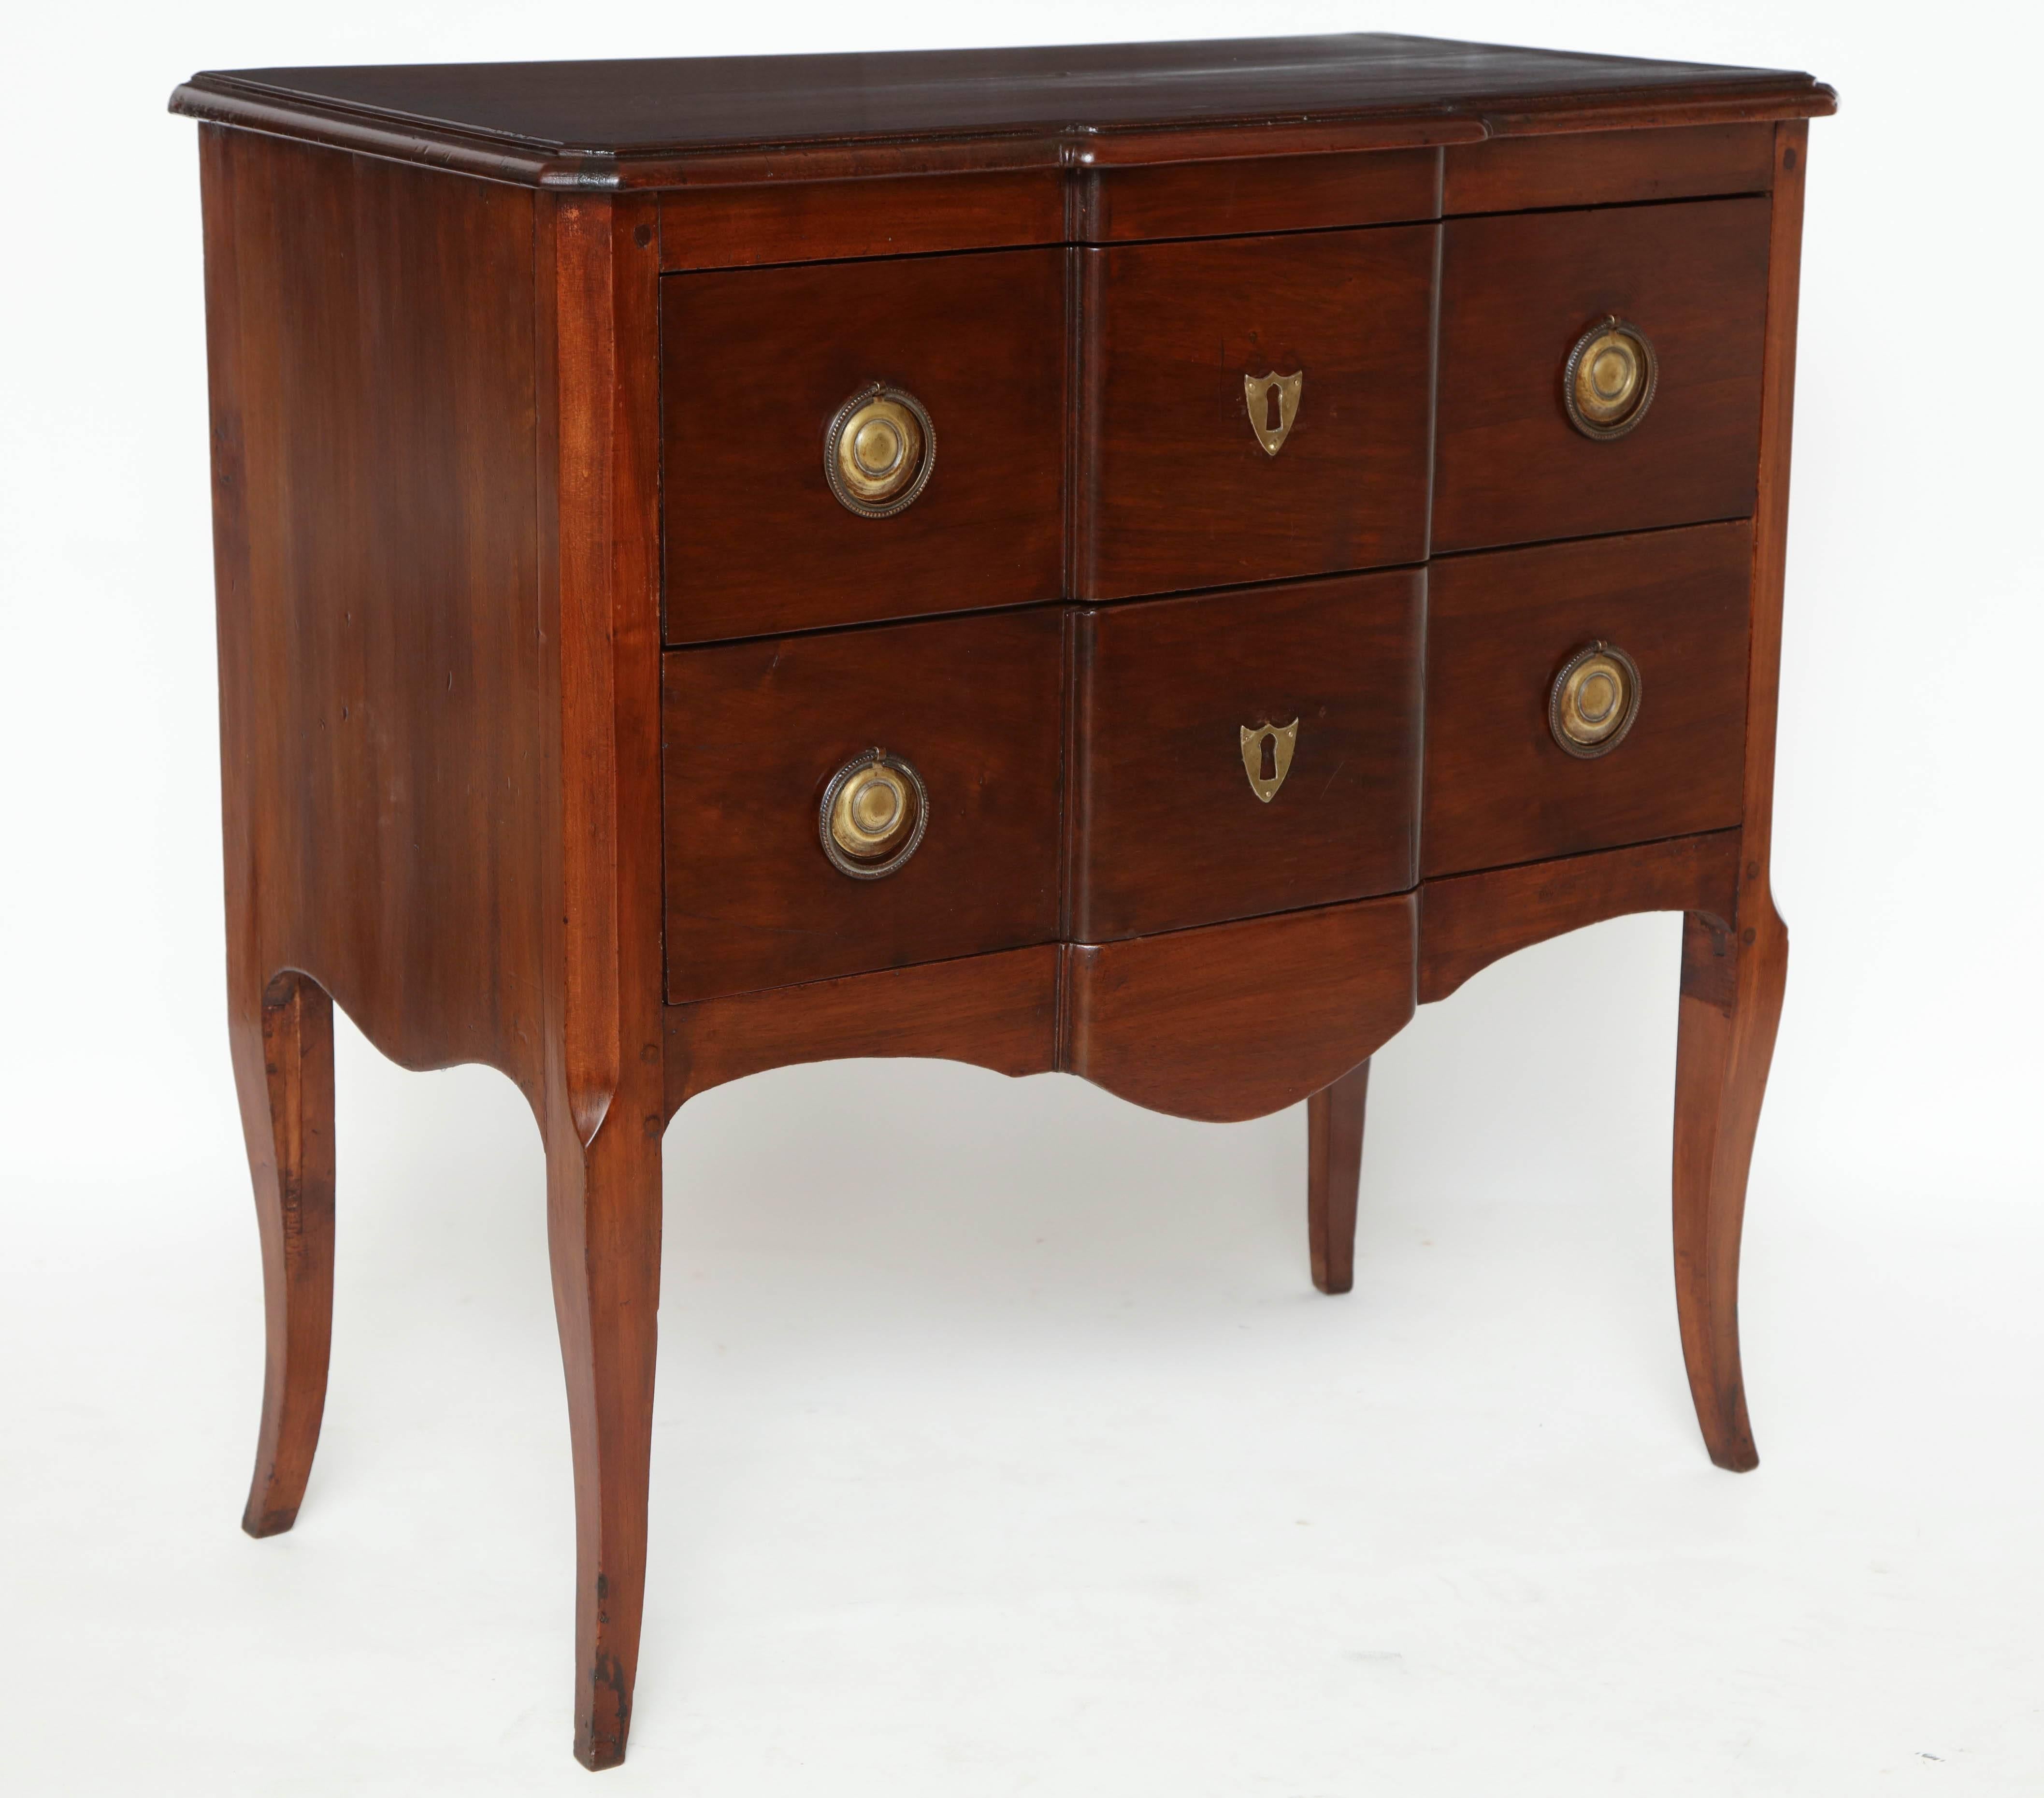 French 18th century walnut two-drawer commode with shaped front, brass pulls and apron.



Available to see in our NYC Showroom 
BK Antiques
306 East 61st St. 2nd fl.
New York, NY 10065